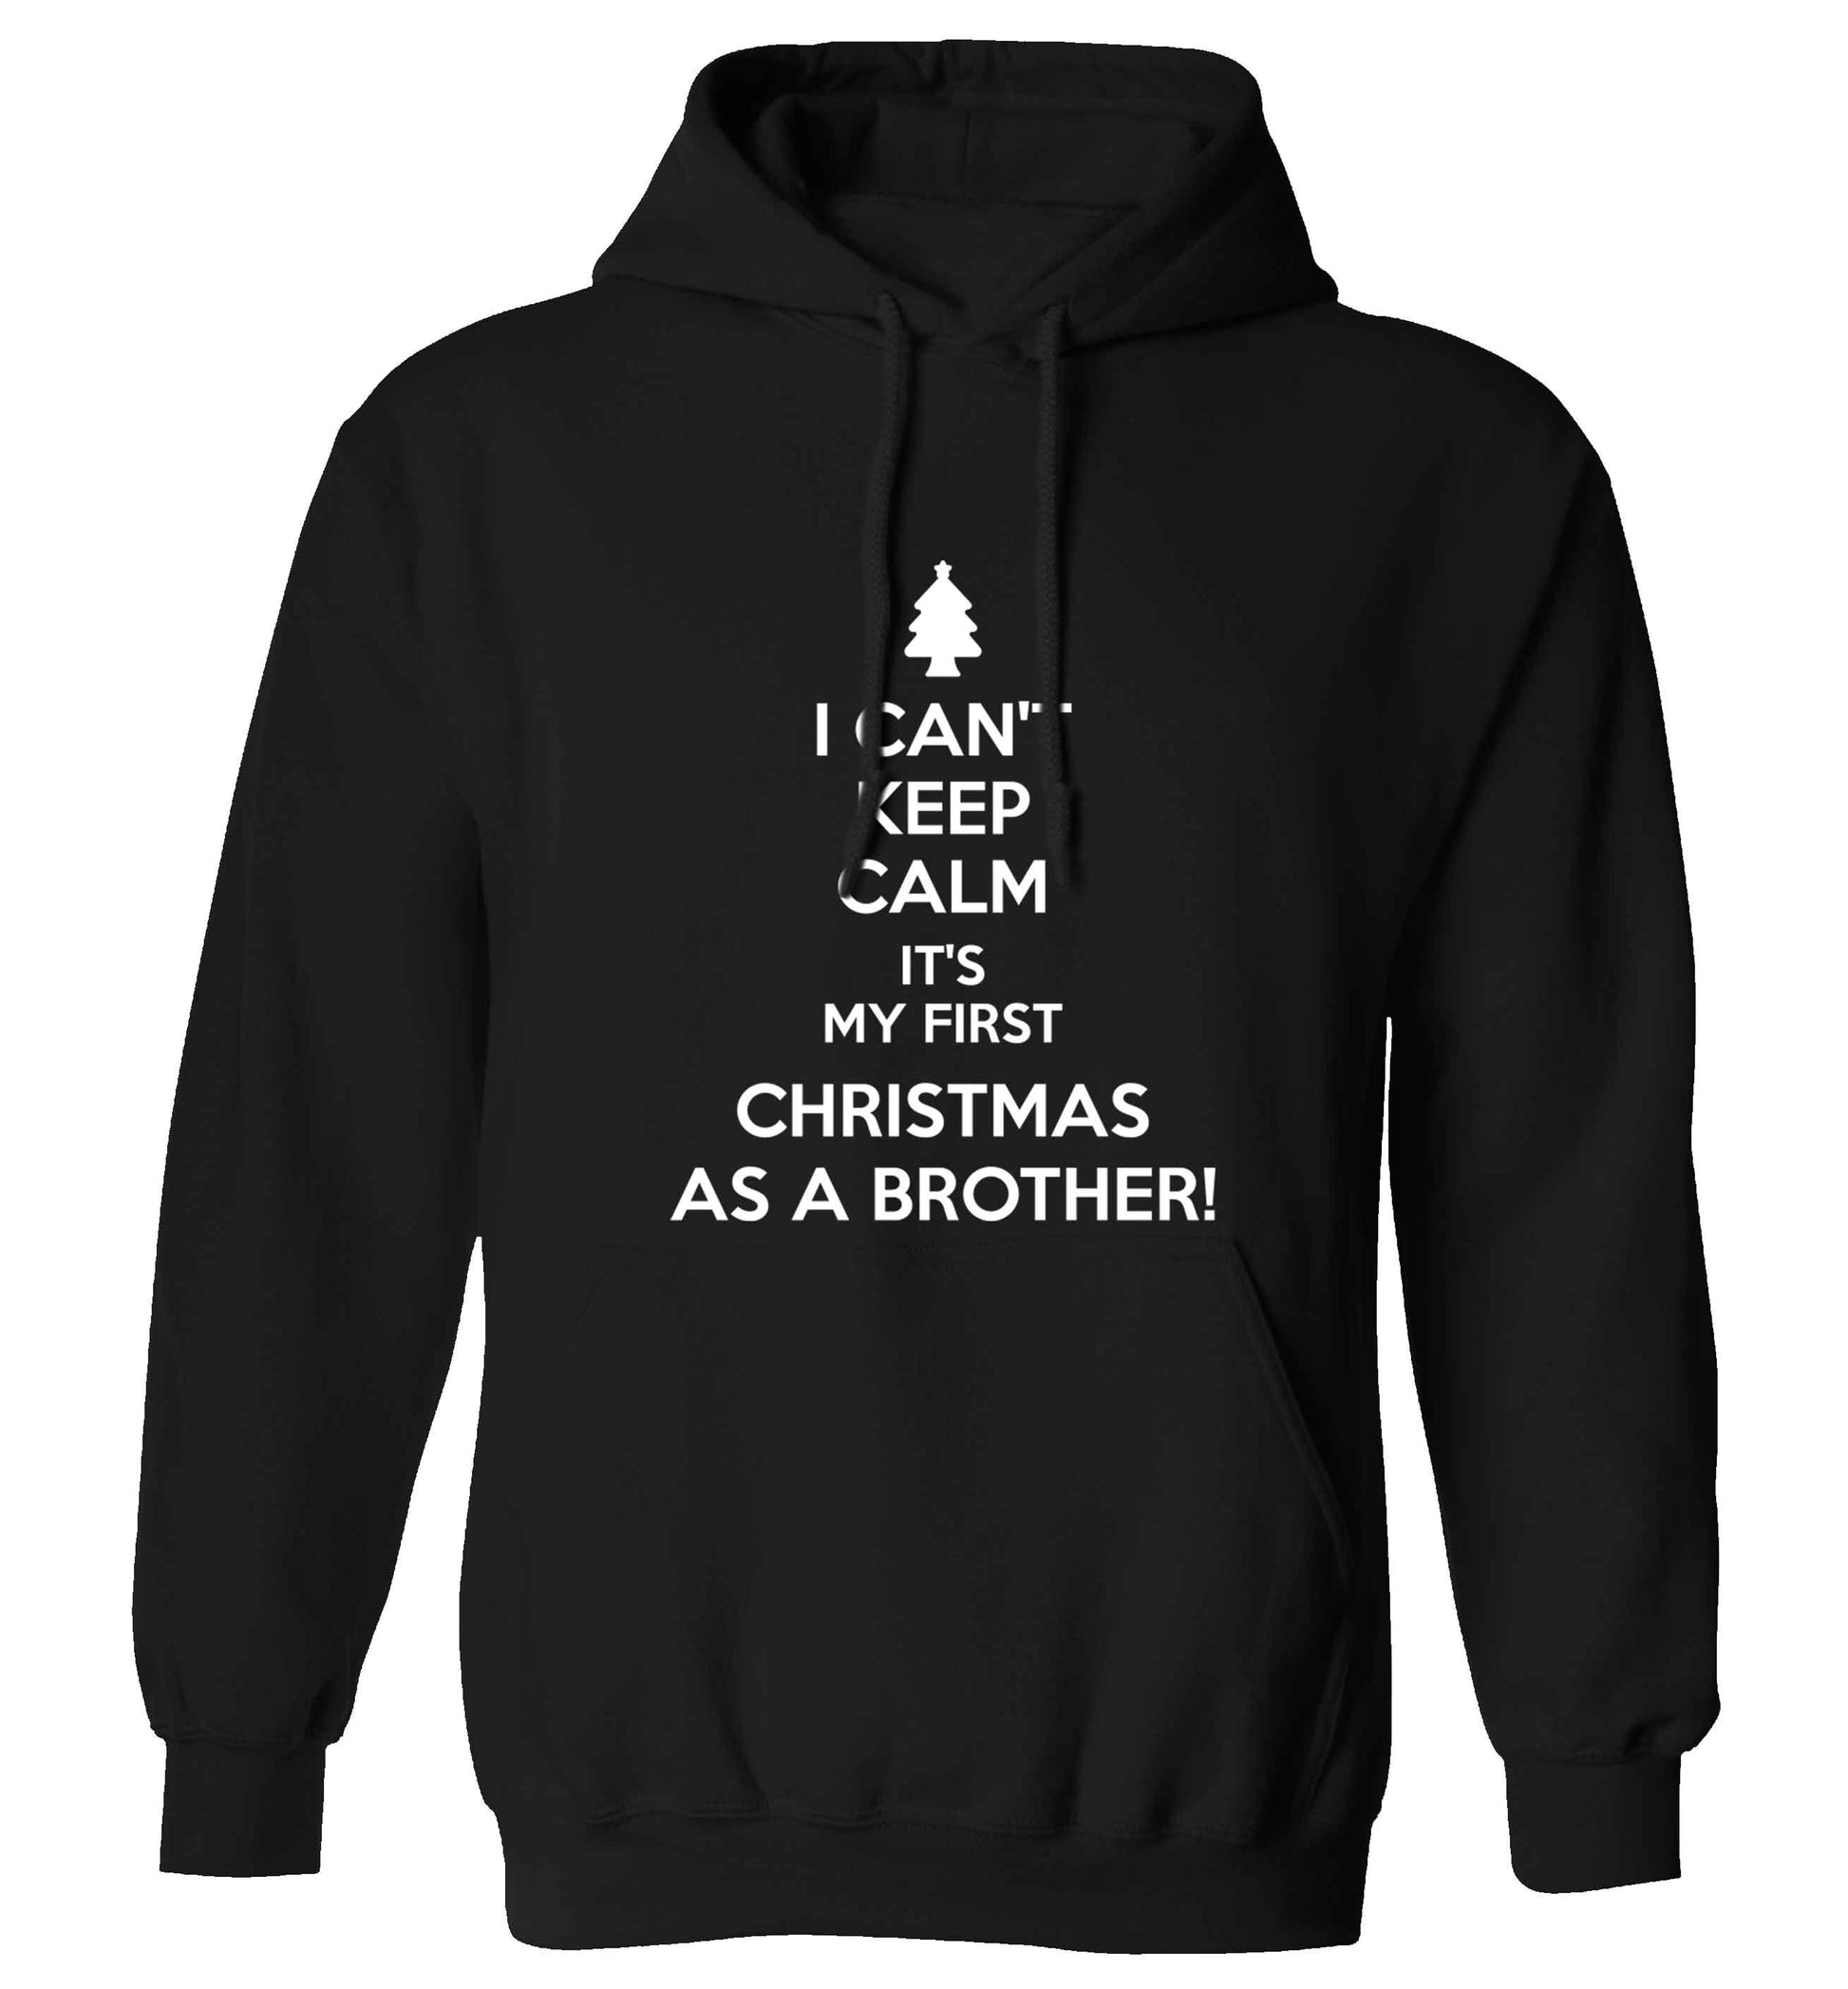 I can't keep calm it's my first Christmas as a brother! adults unisex black hoodie 2XL